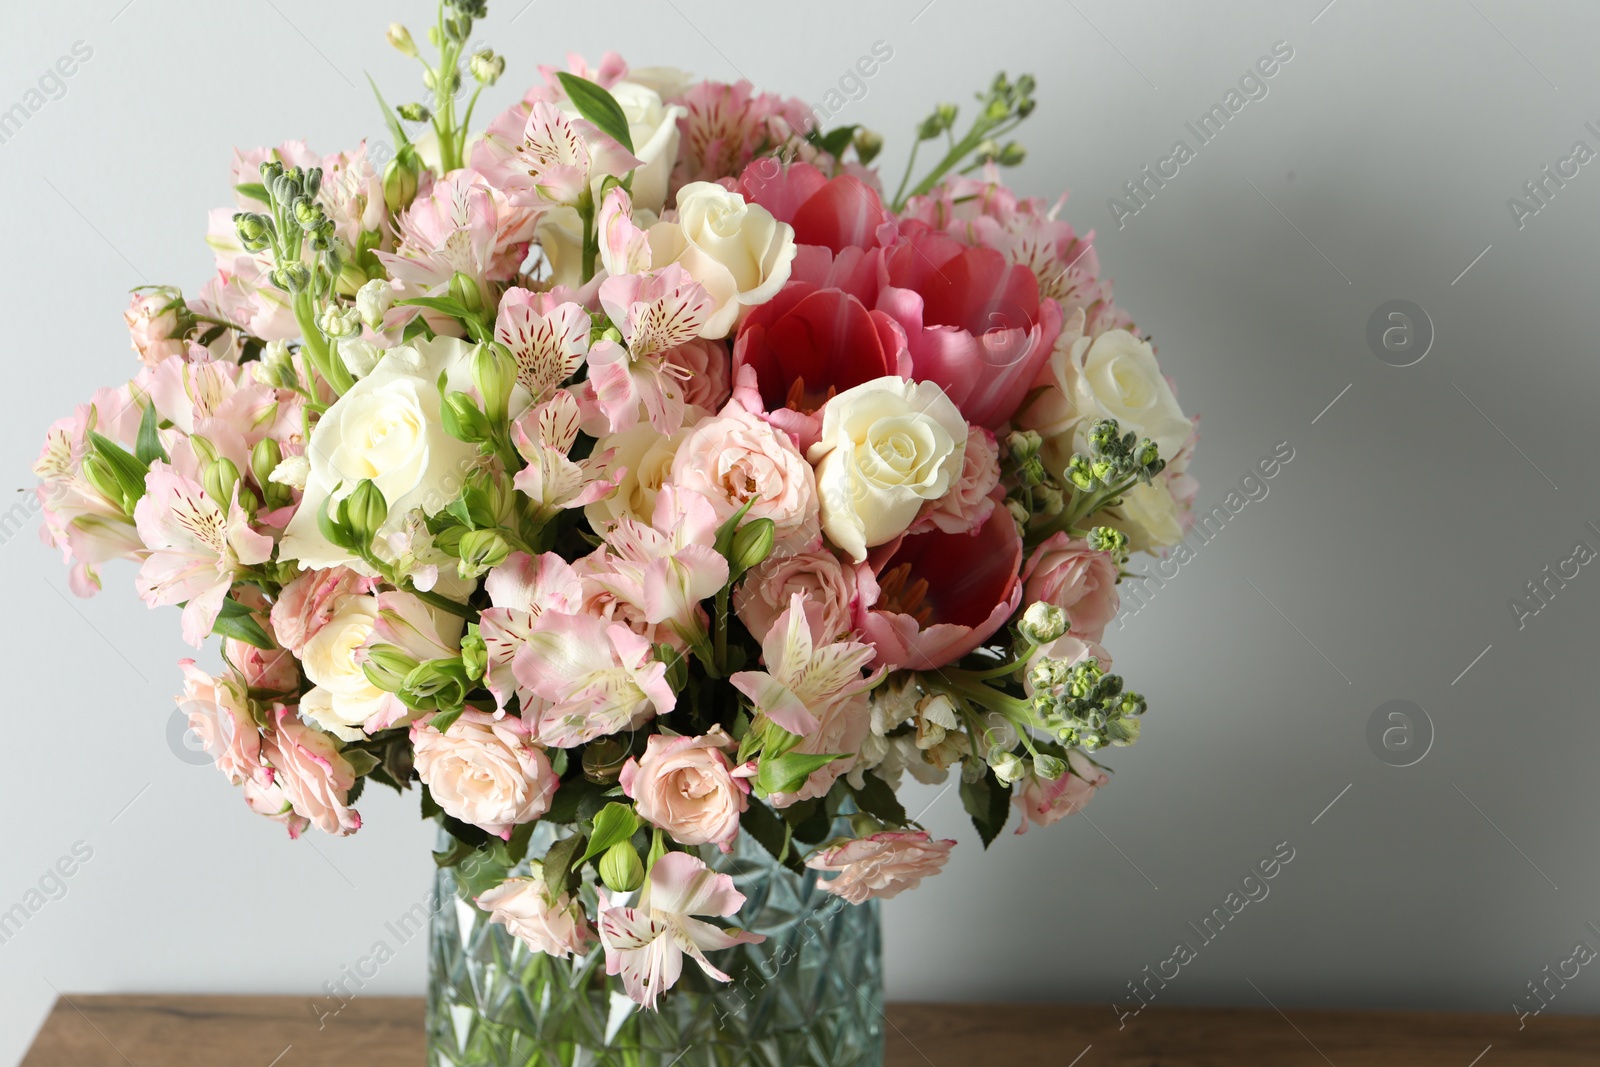 Photo of Beautiful bouquet of fresh flowers in vase on wooden table